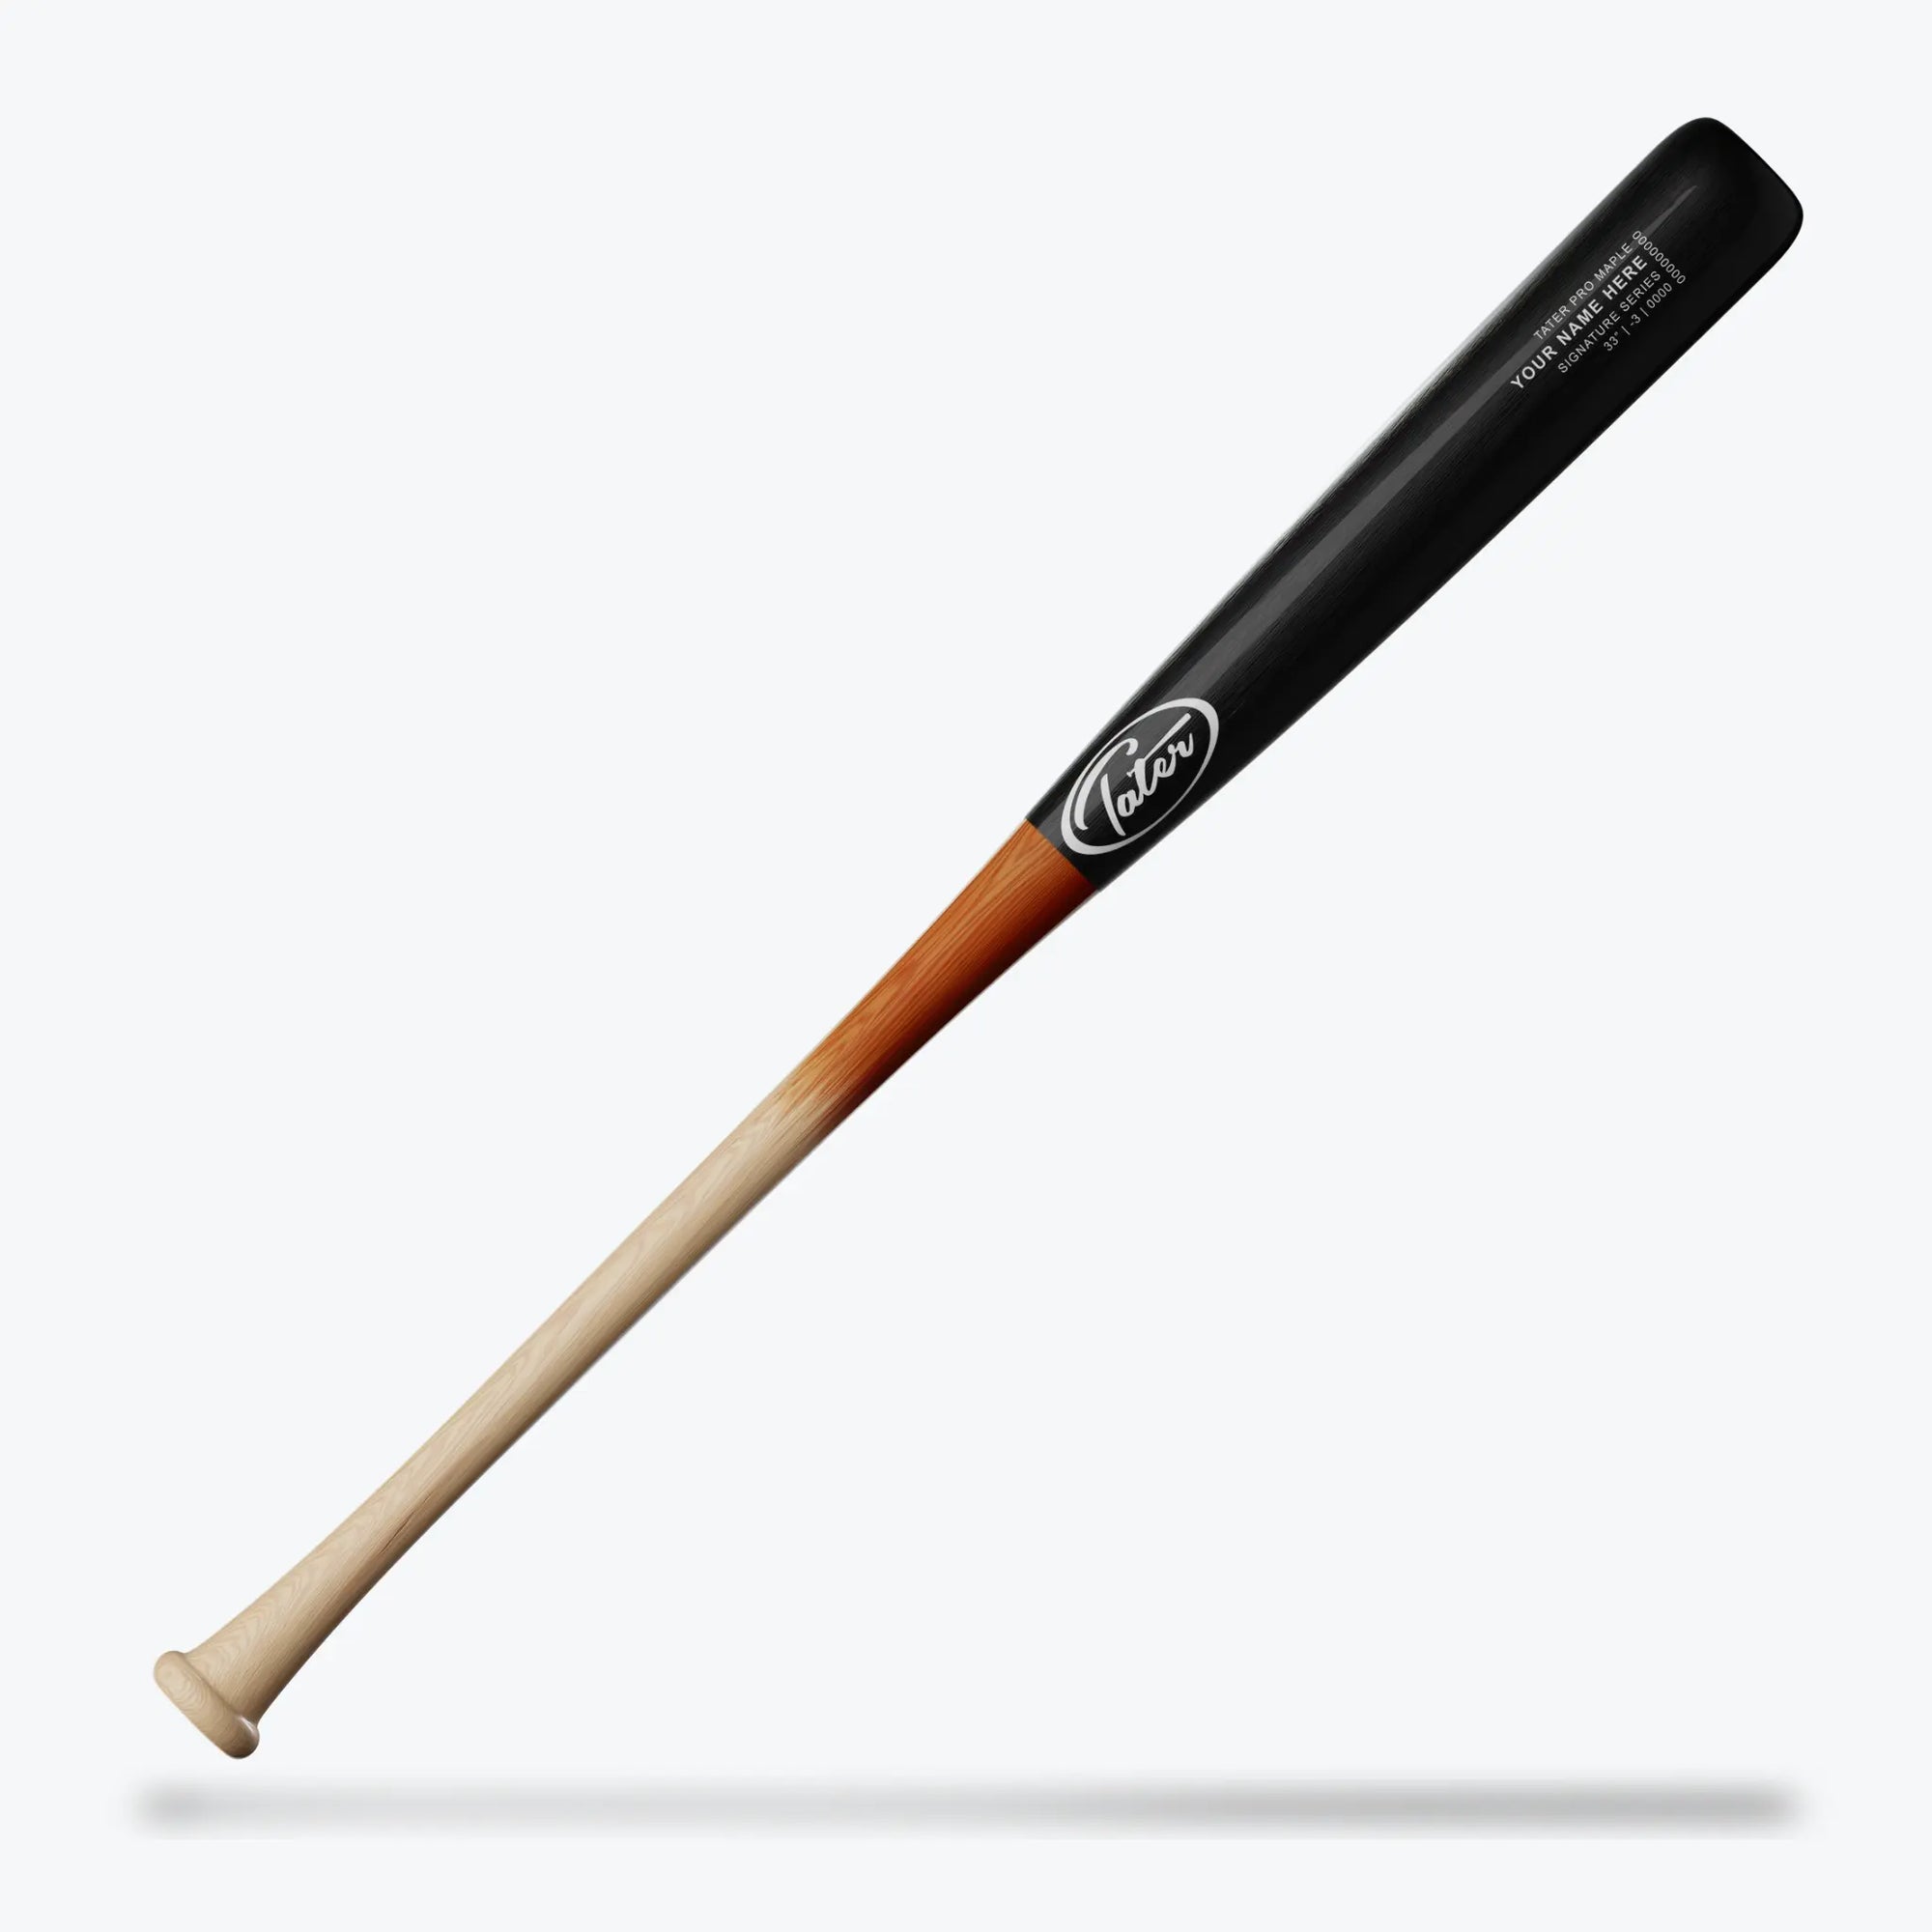 The image highlights a Tater 243 model baseball bat, end-loaded and measuring 32 inches in length. The bat features a sleek black barrel that transitions to a natural wood handle, exemplifying a classic design with a modern twist, suitable for power hitters.